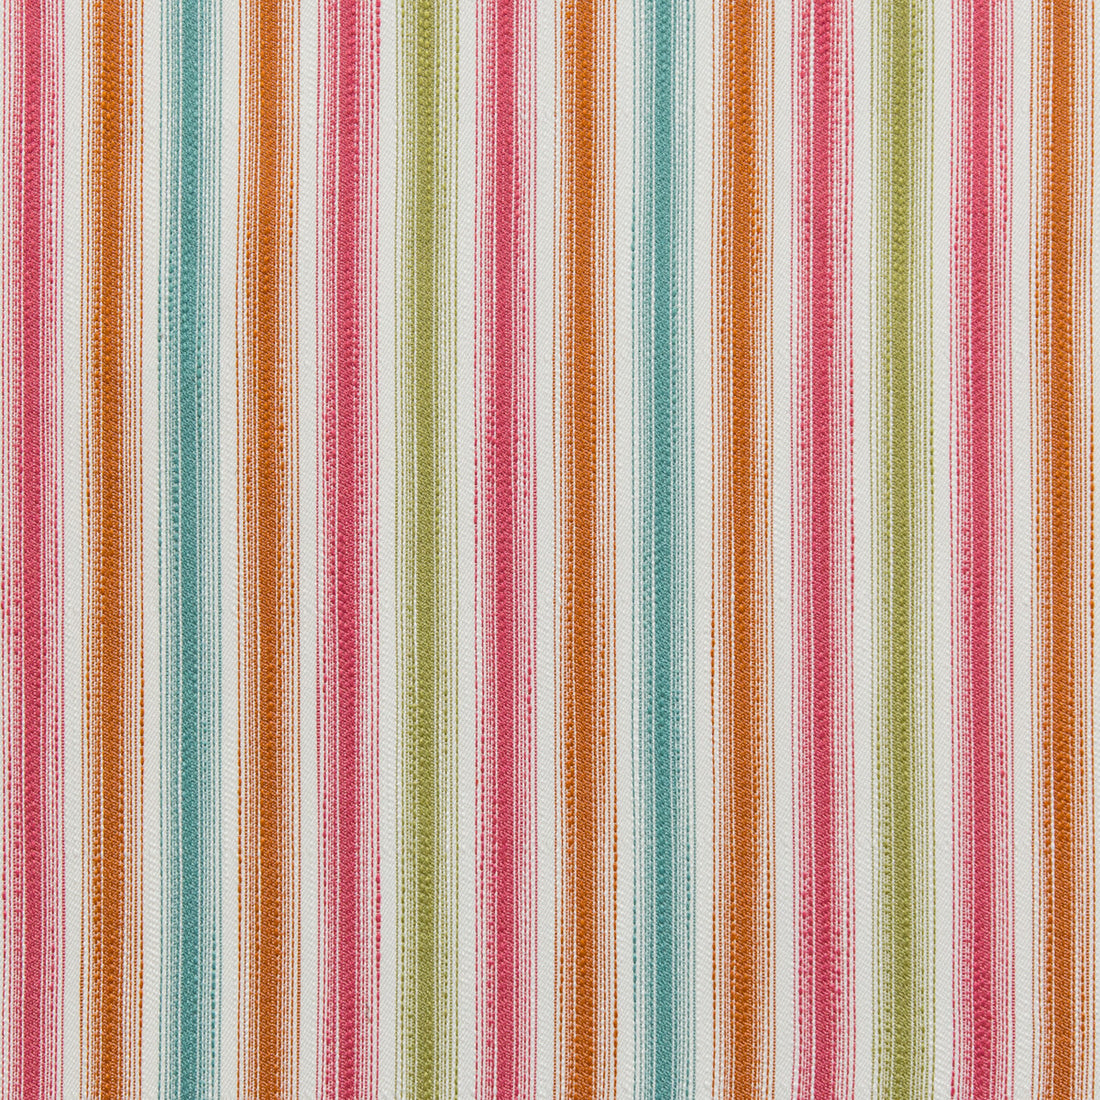 Bella Vita fabric in fruit punch color - pattern 35833.712.0 - by Kravet Design in the Indoor / Outdoor collection